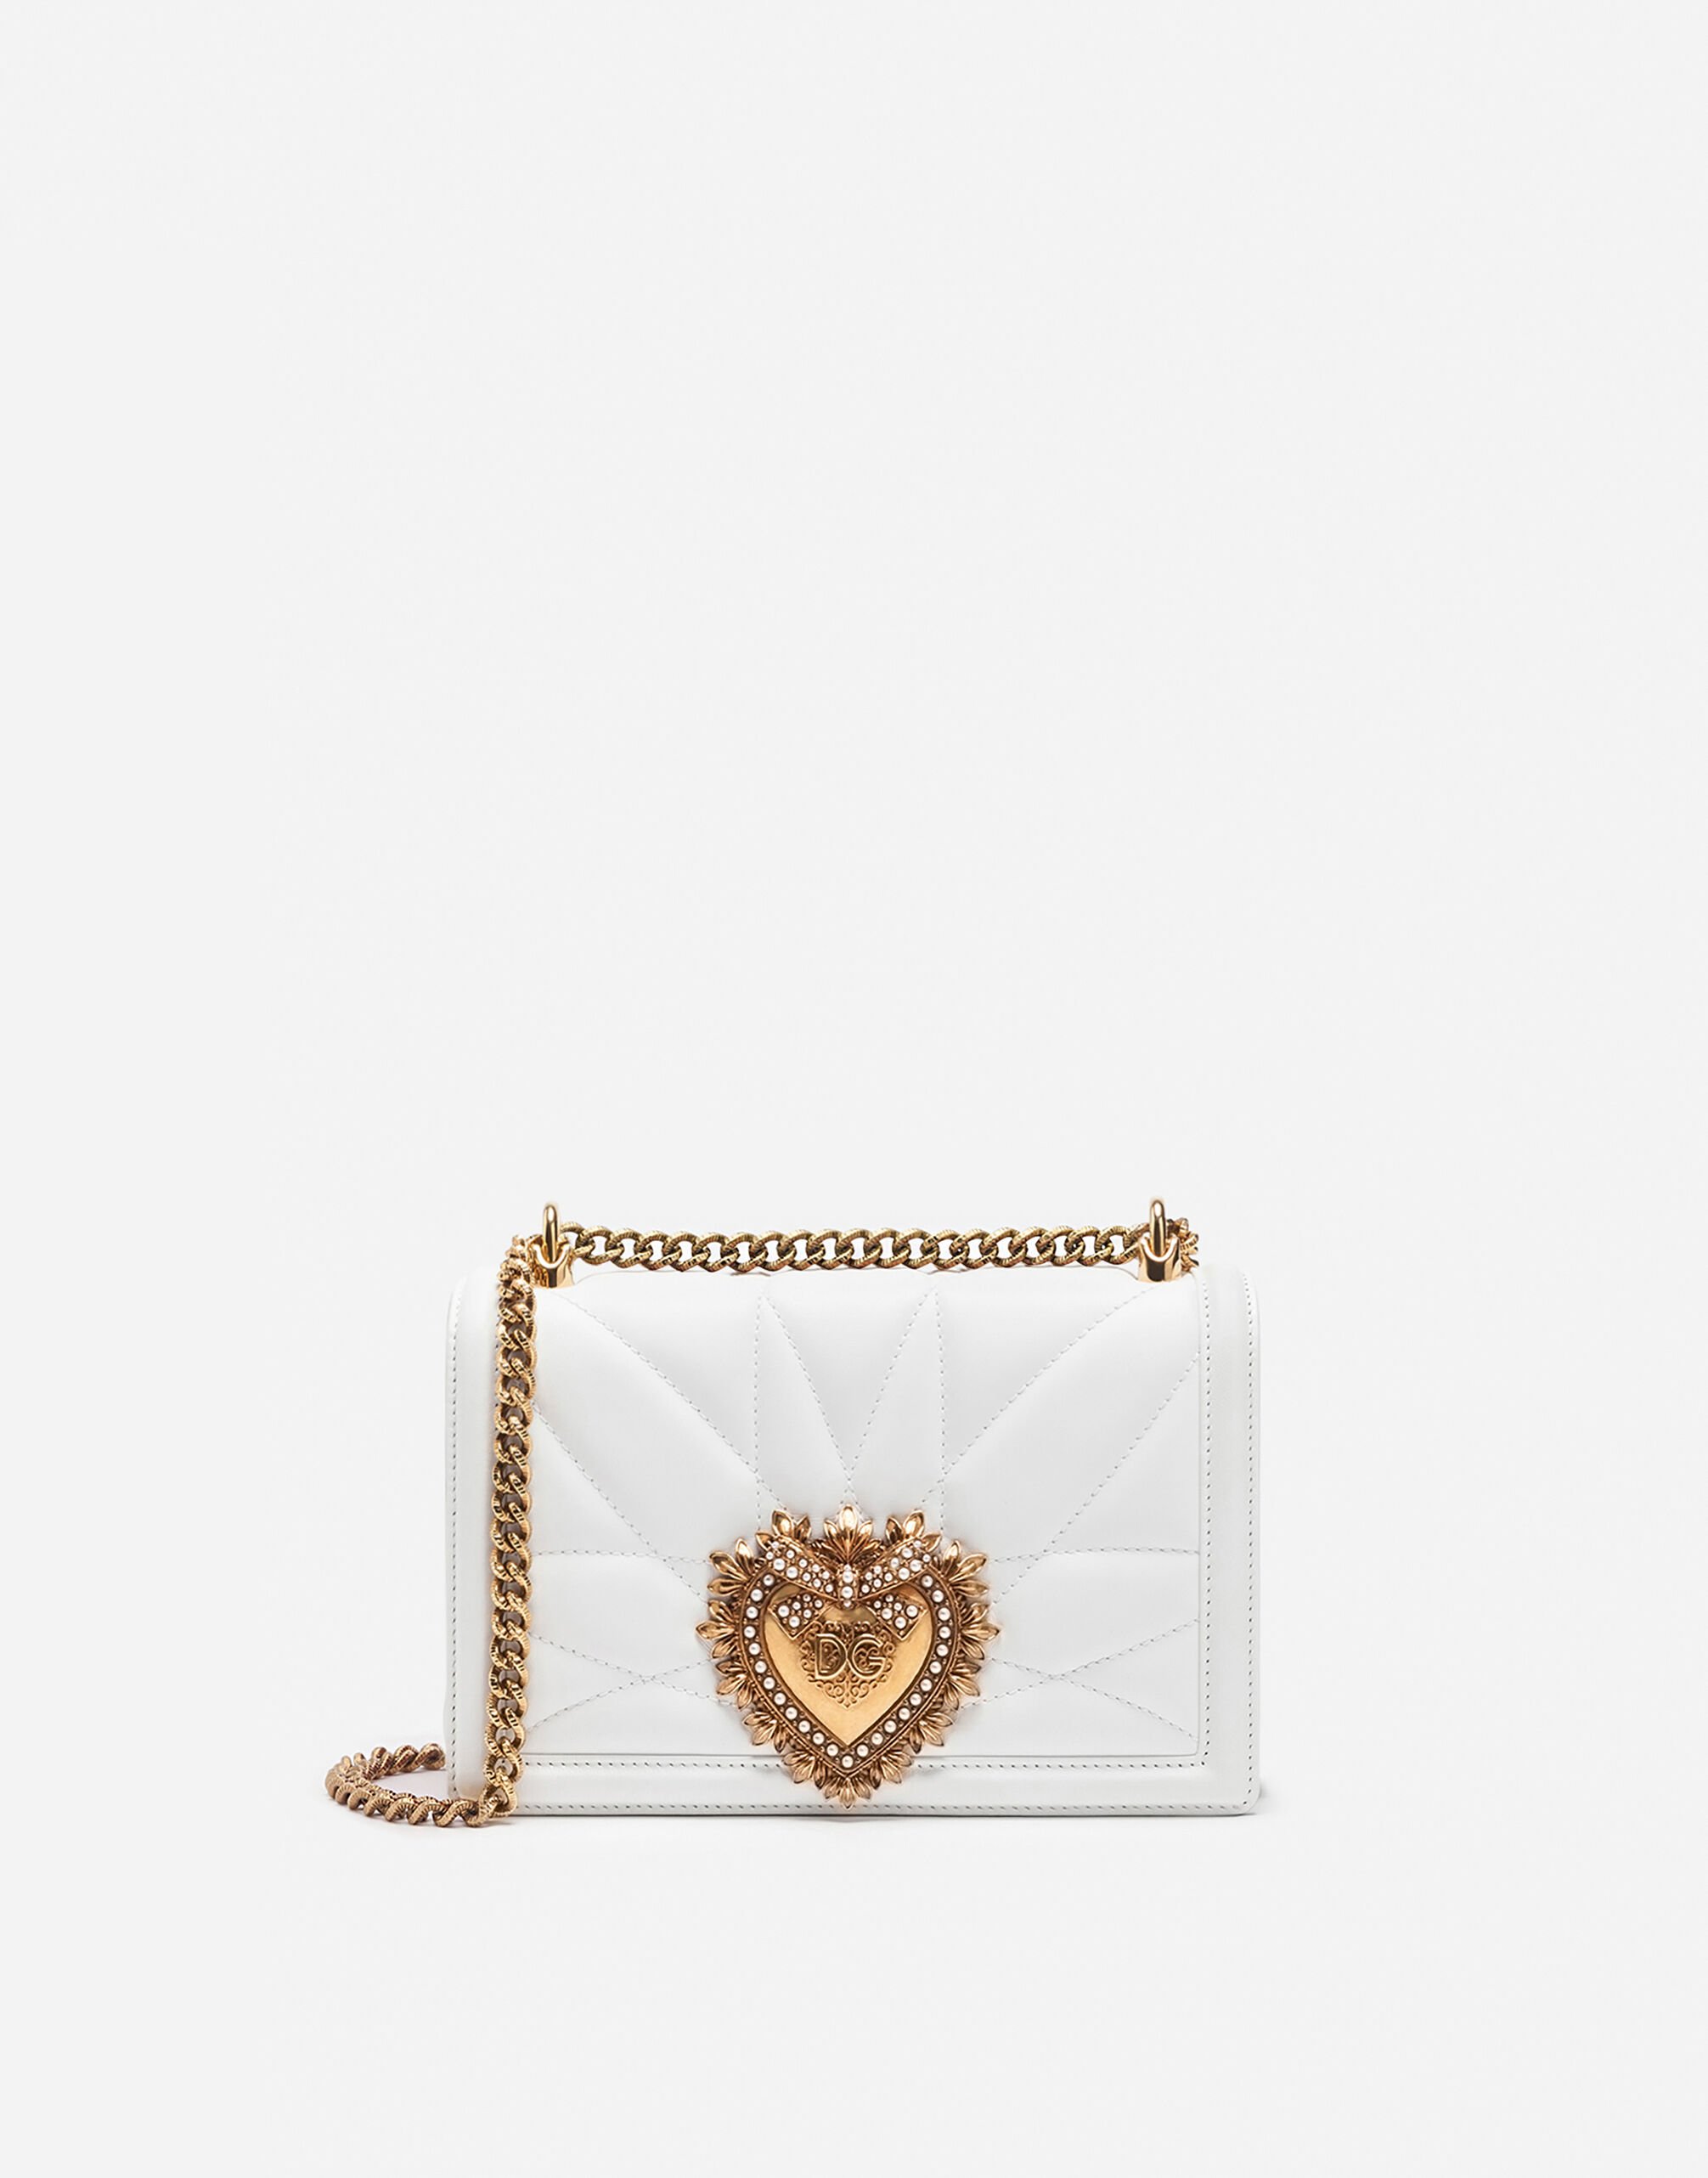 Dolce & Gabbana Medium Devotion crossbody bag in quilted nappa leather Silver BB7170AY835